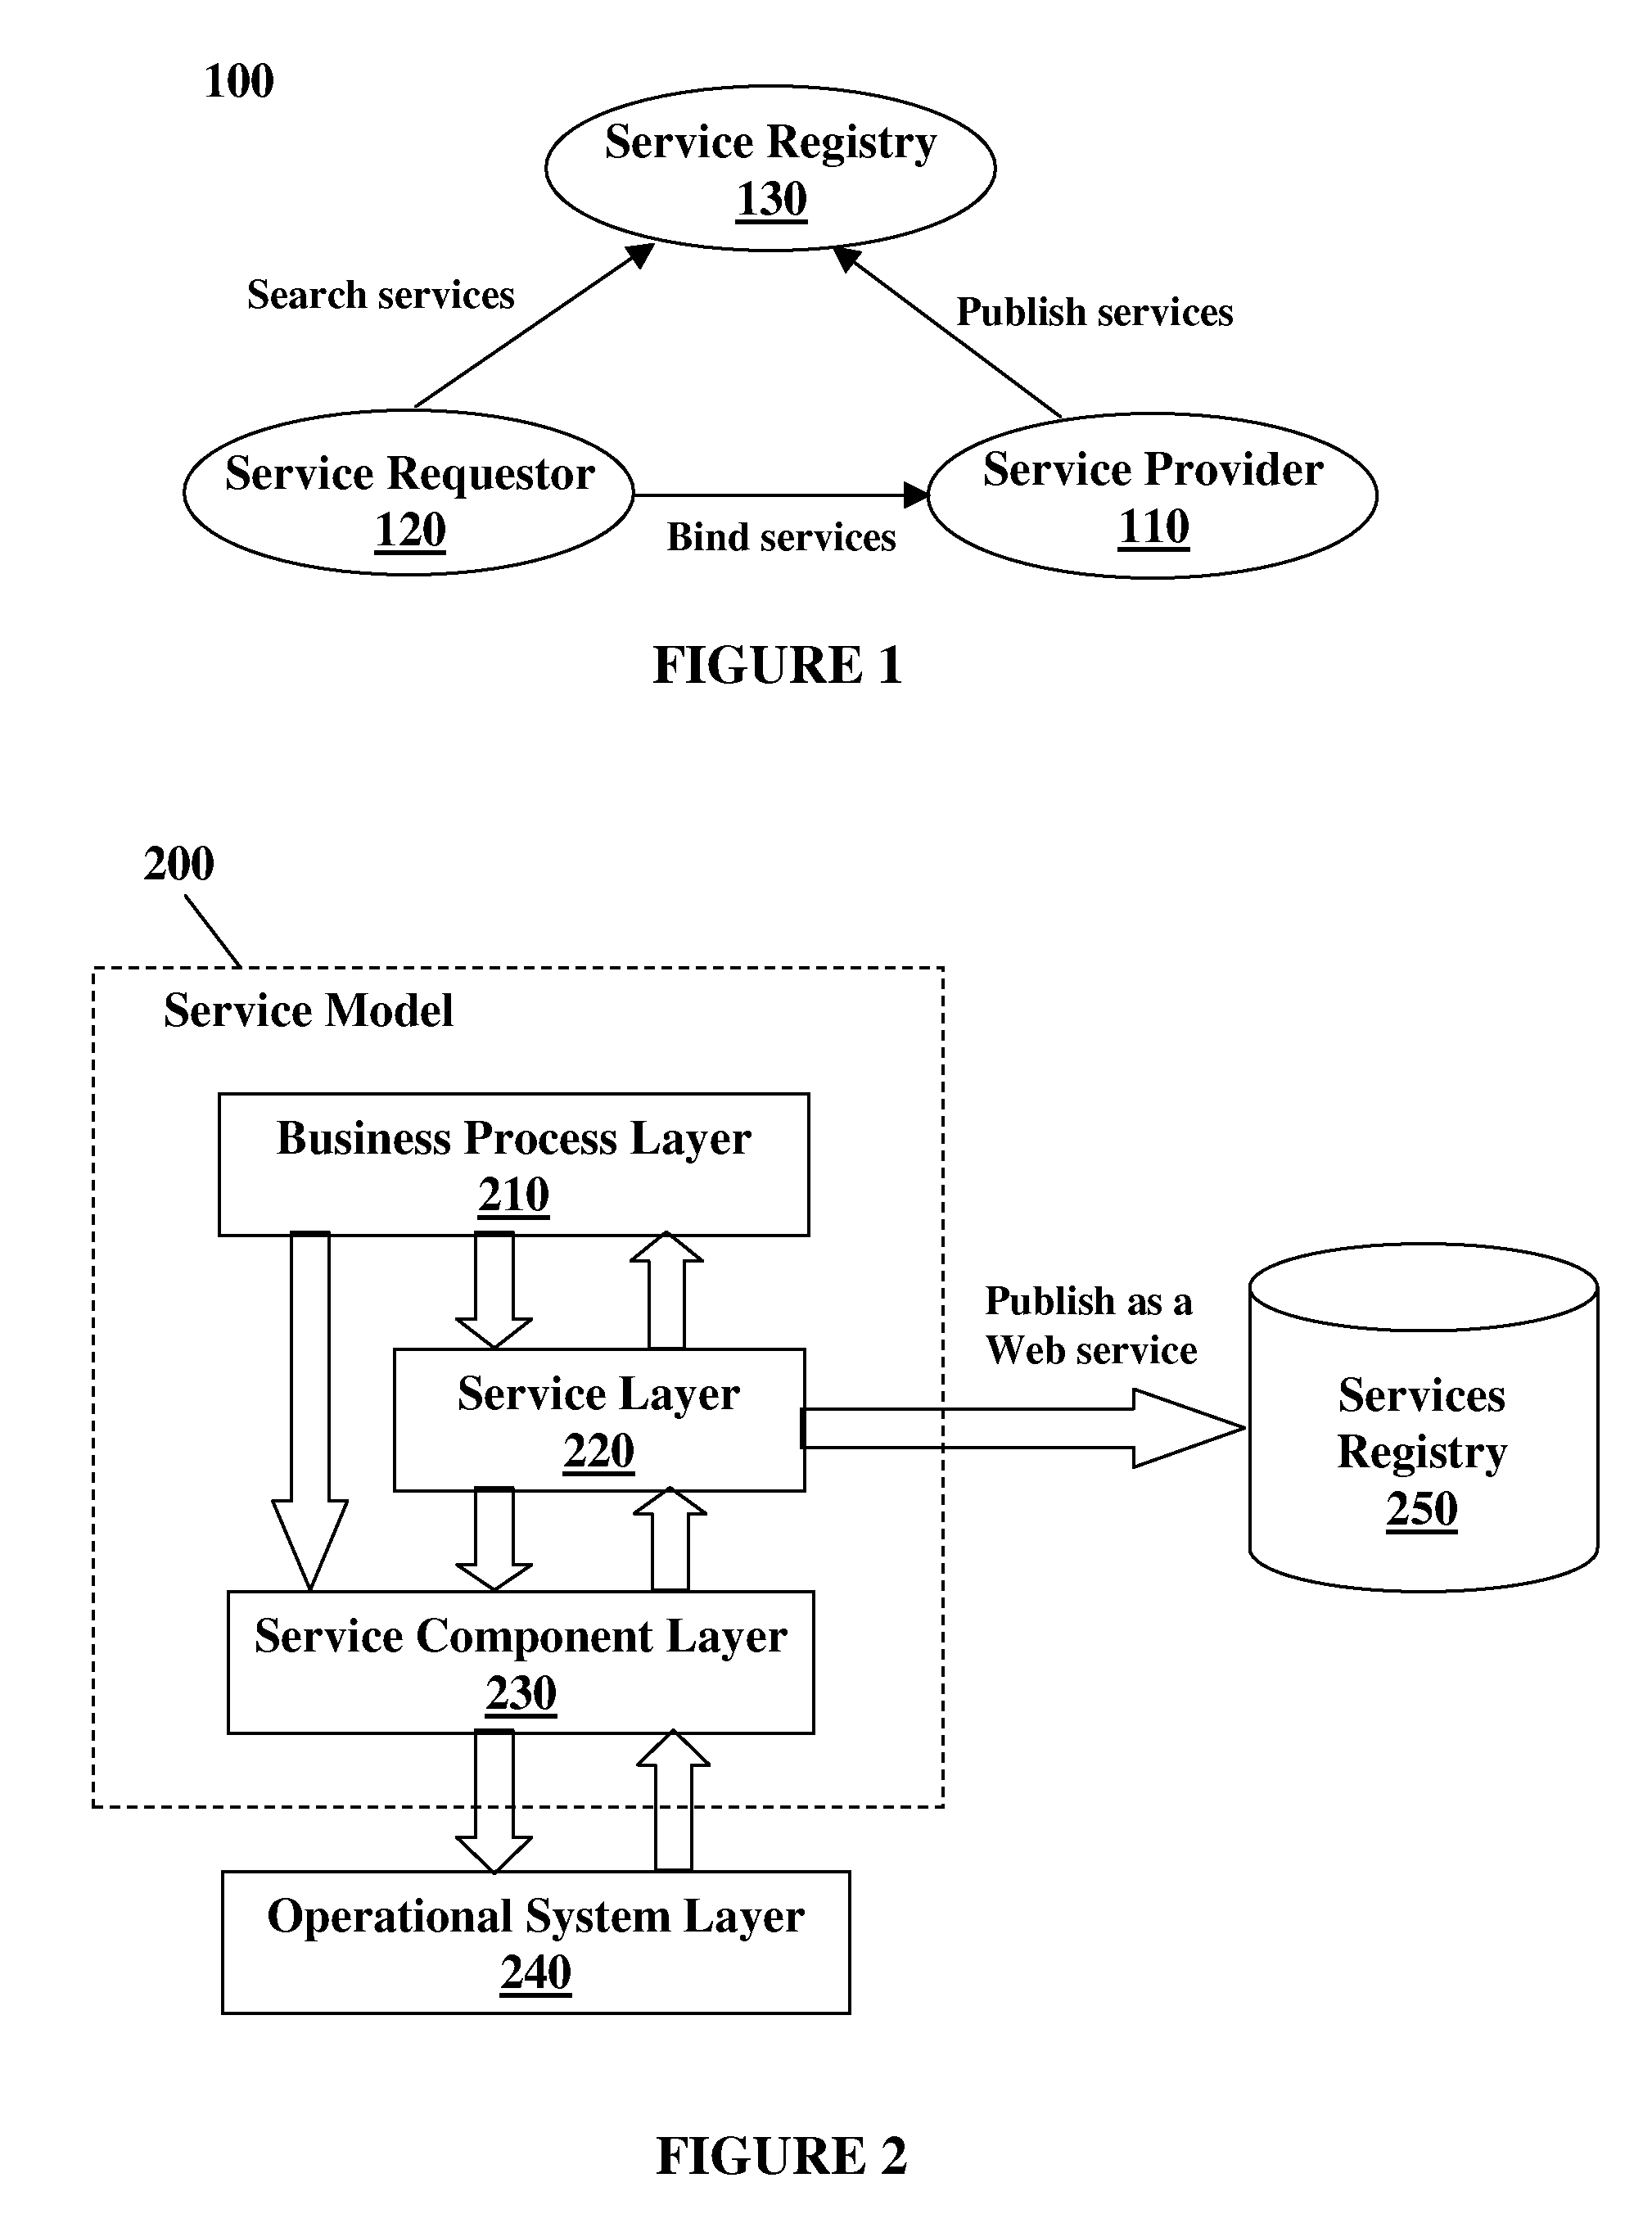 Method and apparatus for the design and development of service-oriented architecture (SOA) solutions